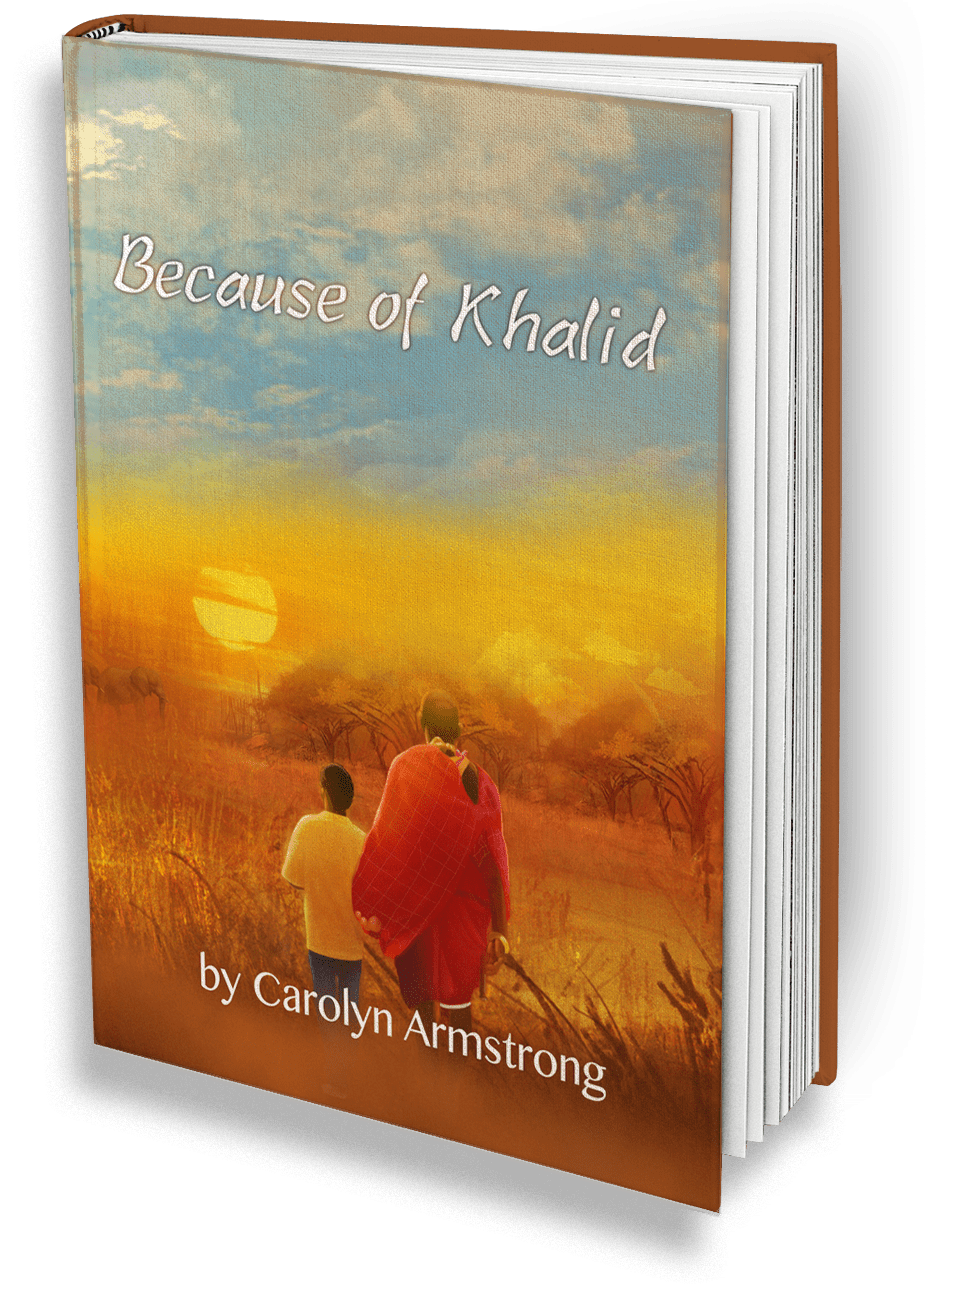 Because of Khalid by Carolyn Armstrong